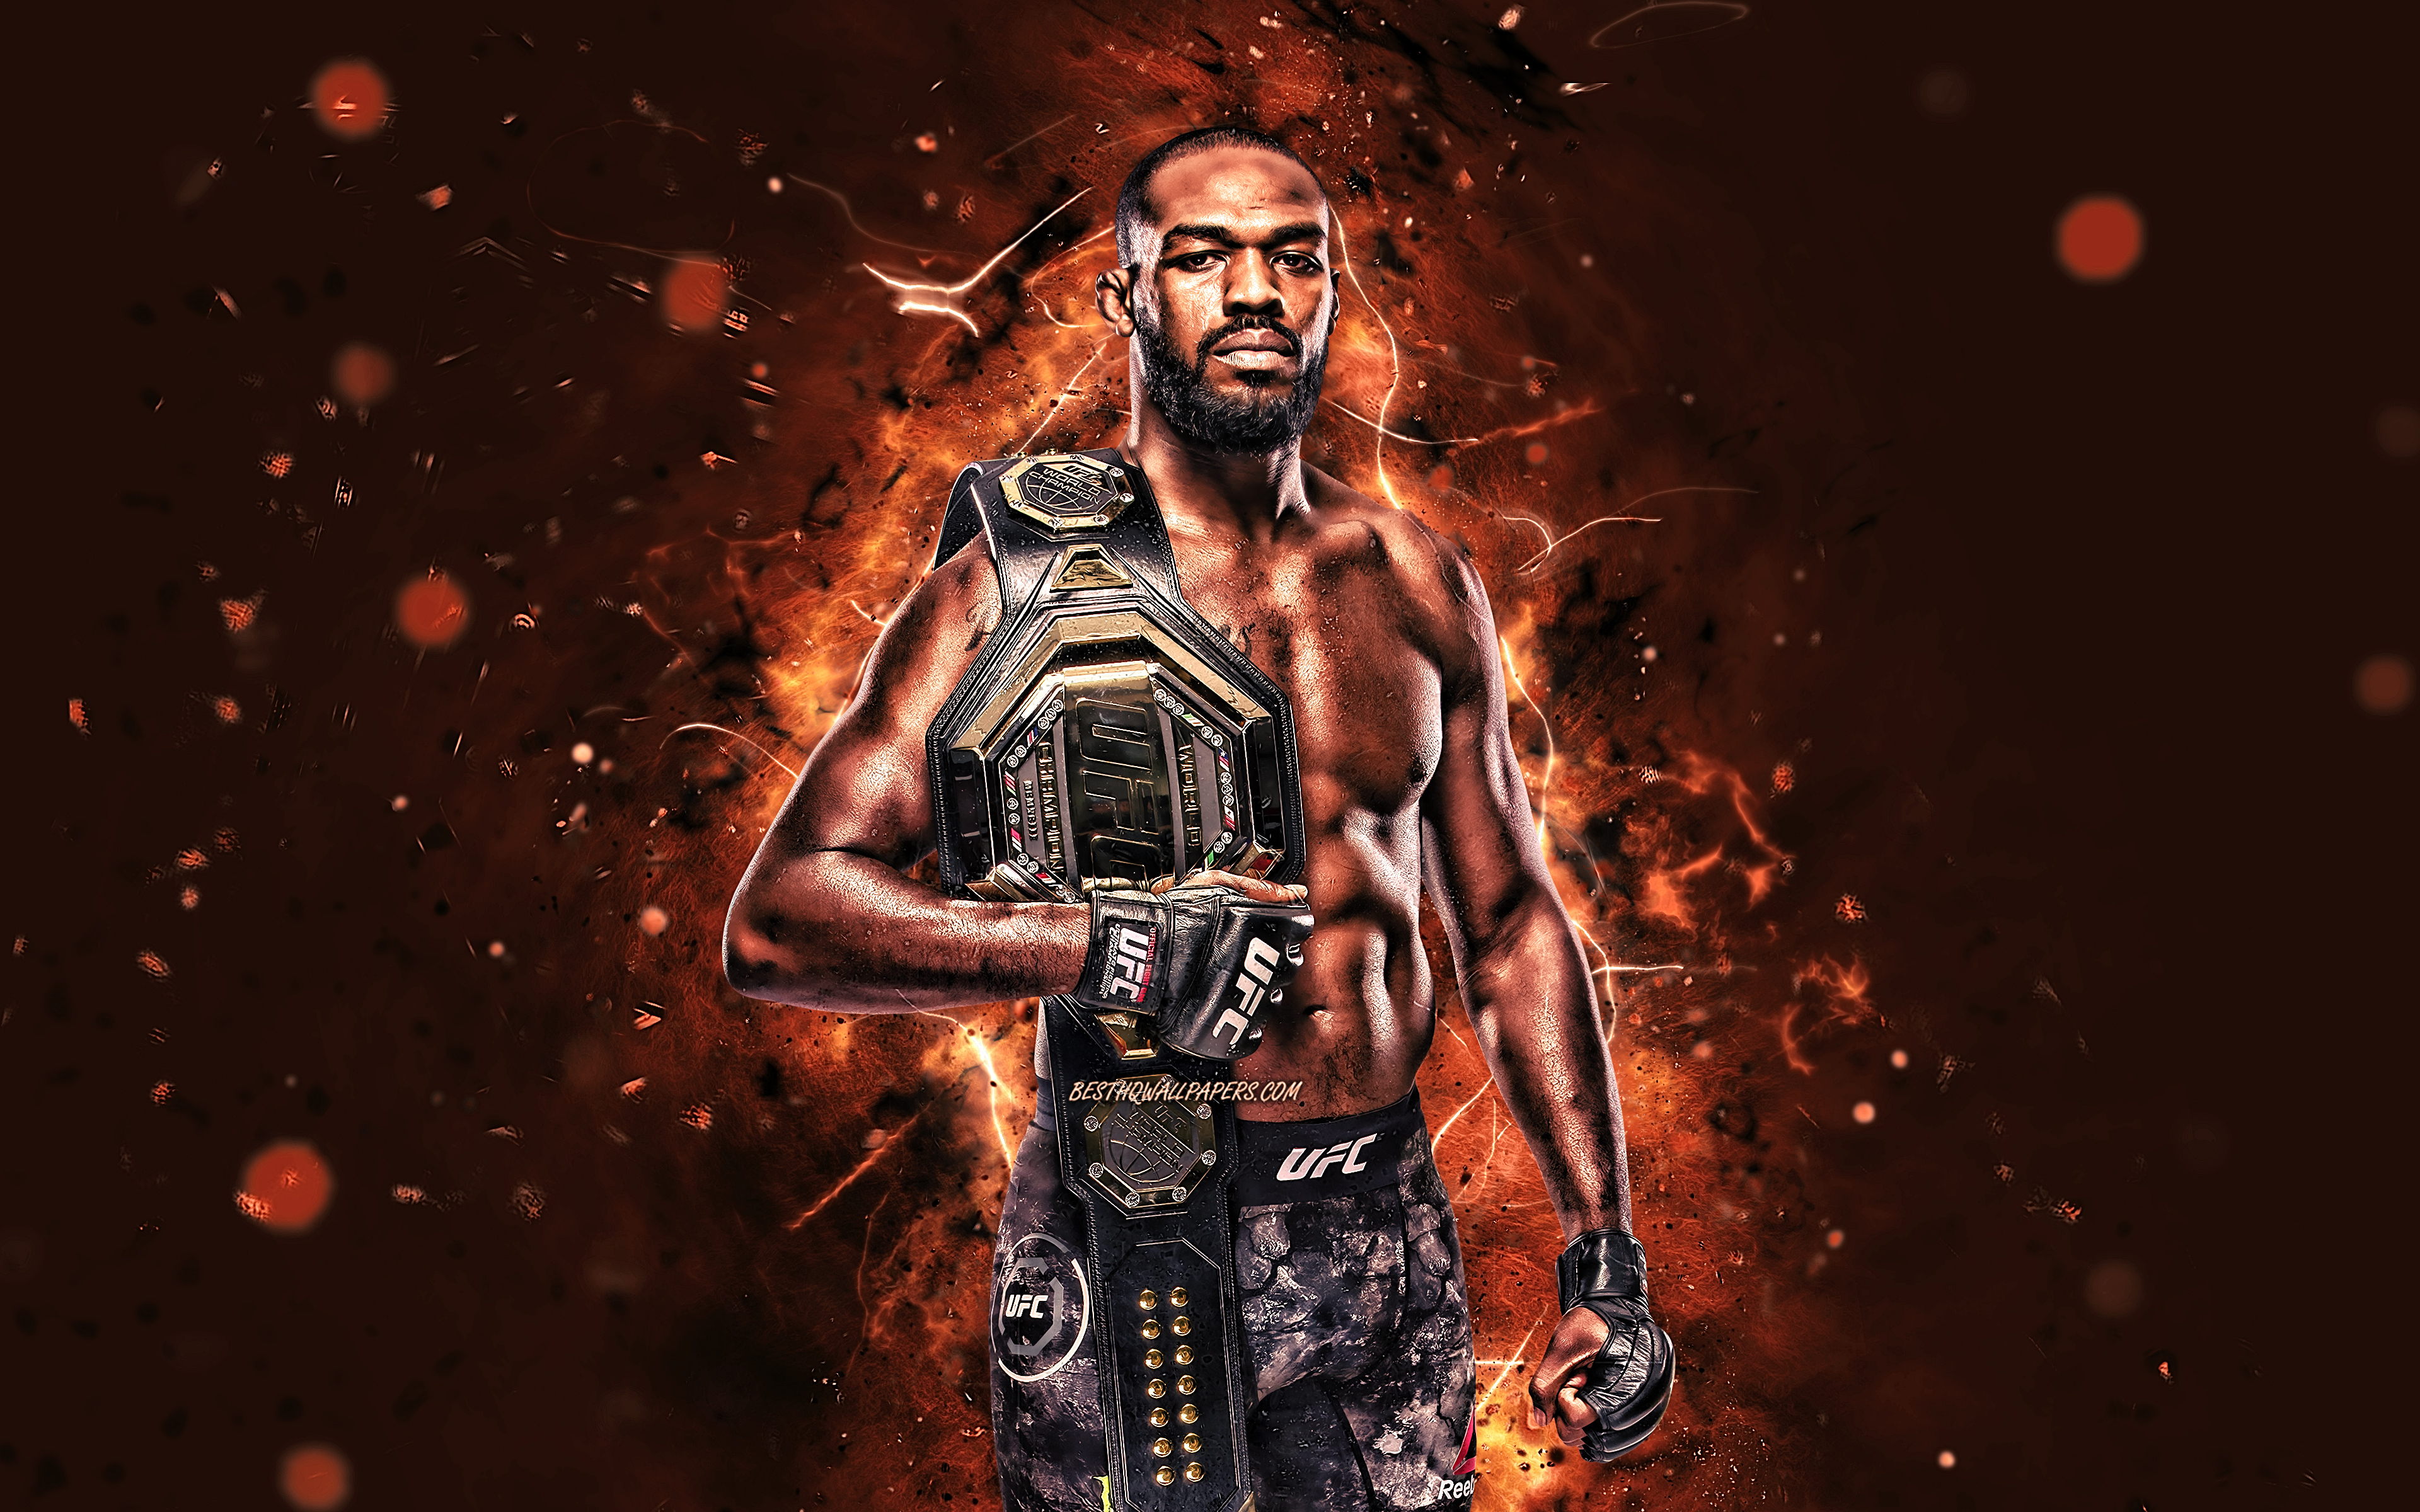 Download wallpaper Jon Jones, 4k, brown neon lights, american fighters, MMA, UFC, Mixed martial arts, Jon Jones 4K, UFC fighters, Jonathan Dwight Jones, MMA fighters for desktop with resolution 3840x2400. High Quality